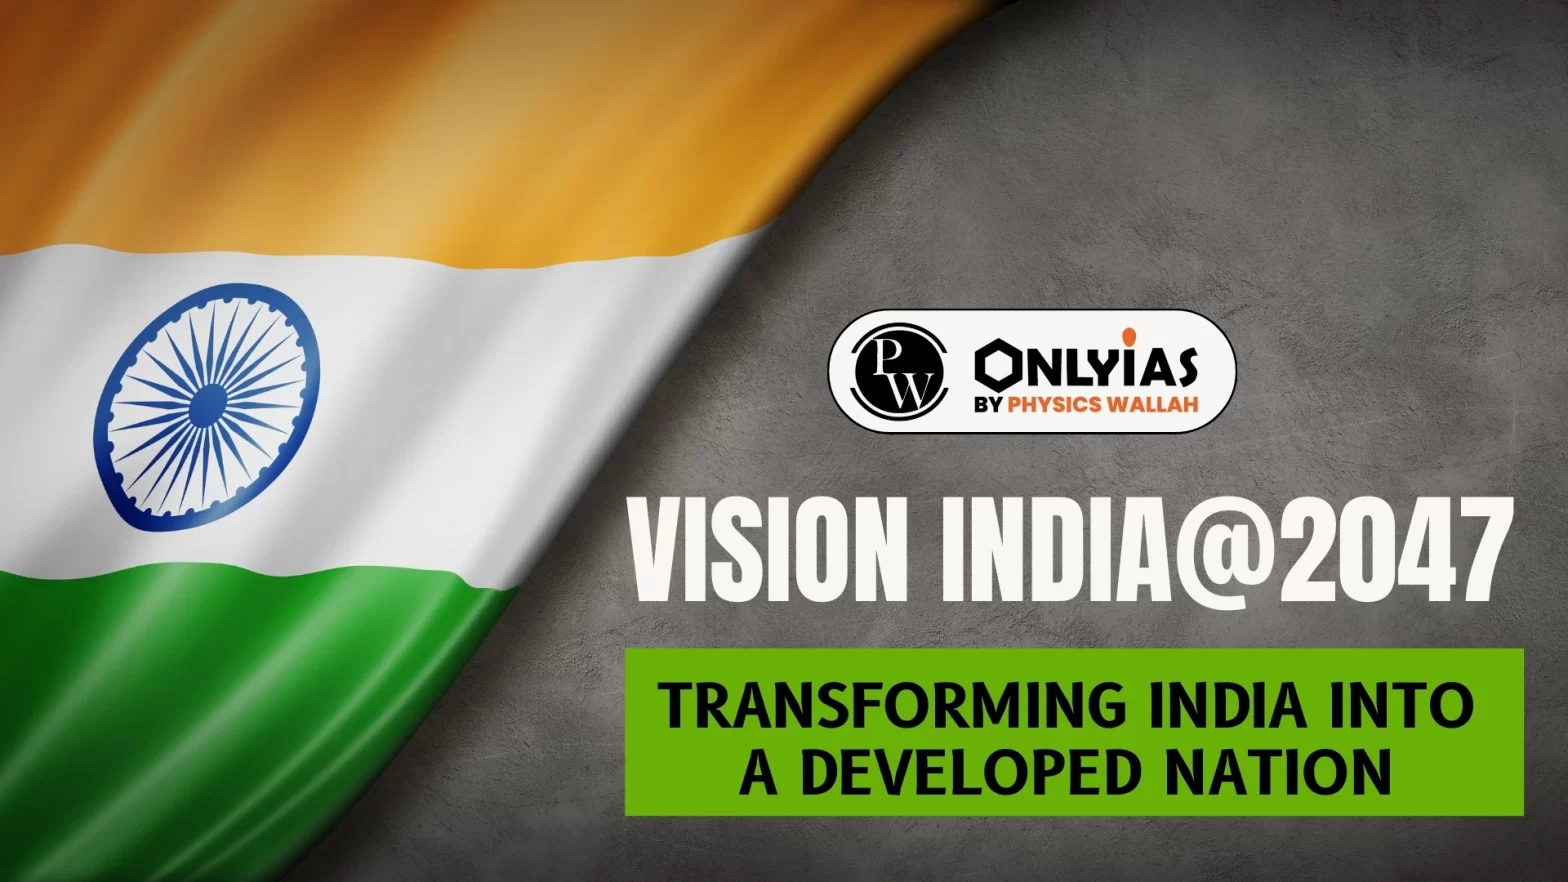 Vision India@2047: Transforming India into a Developed Nation